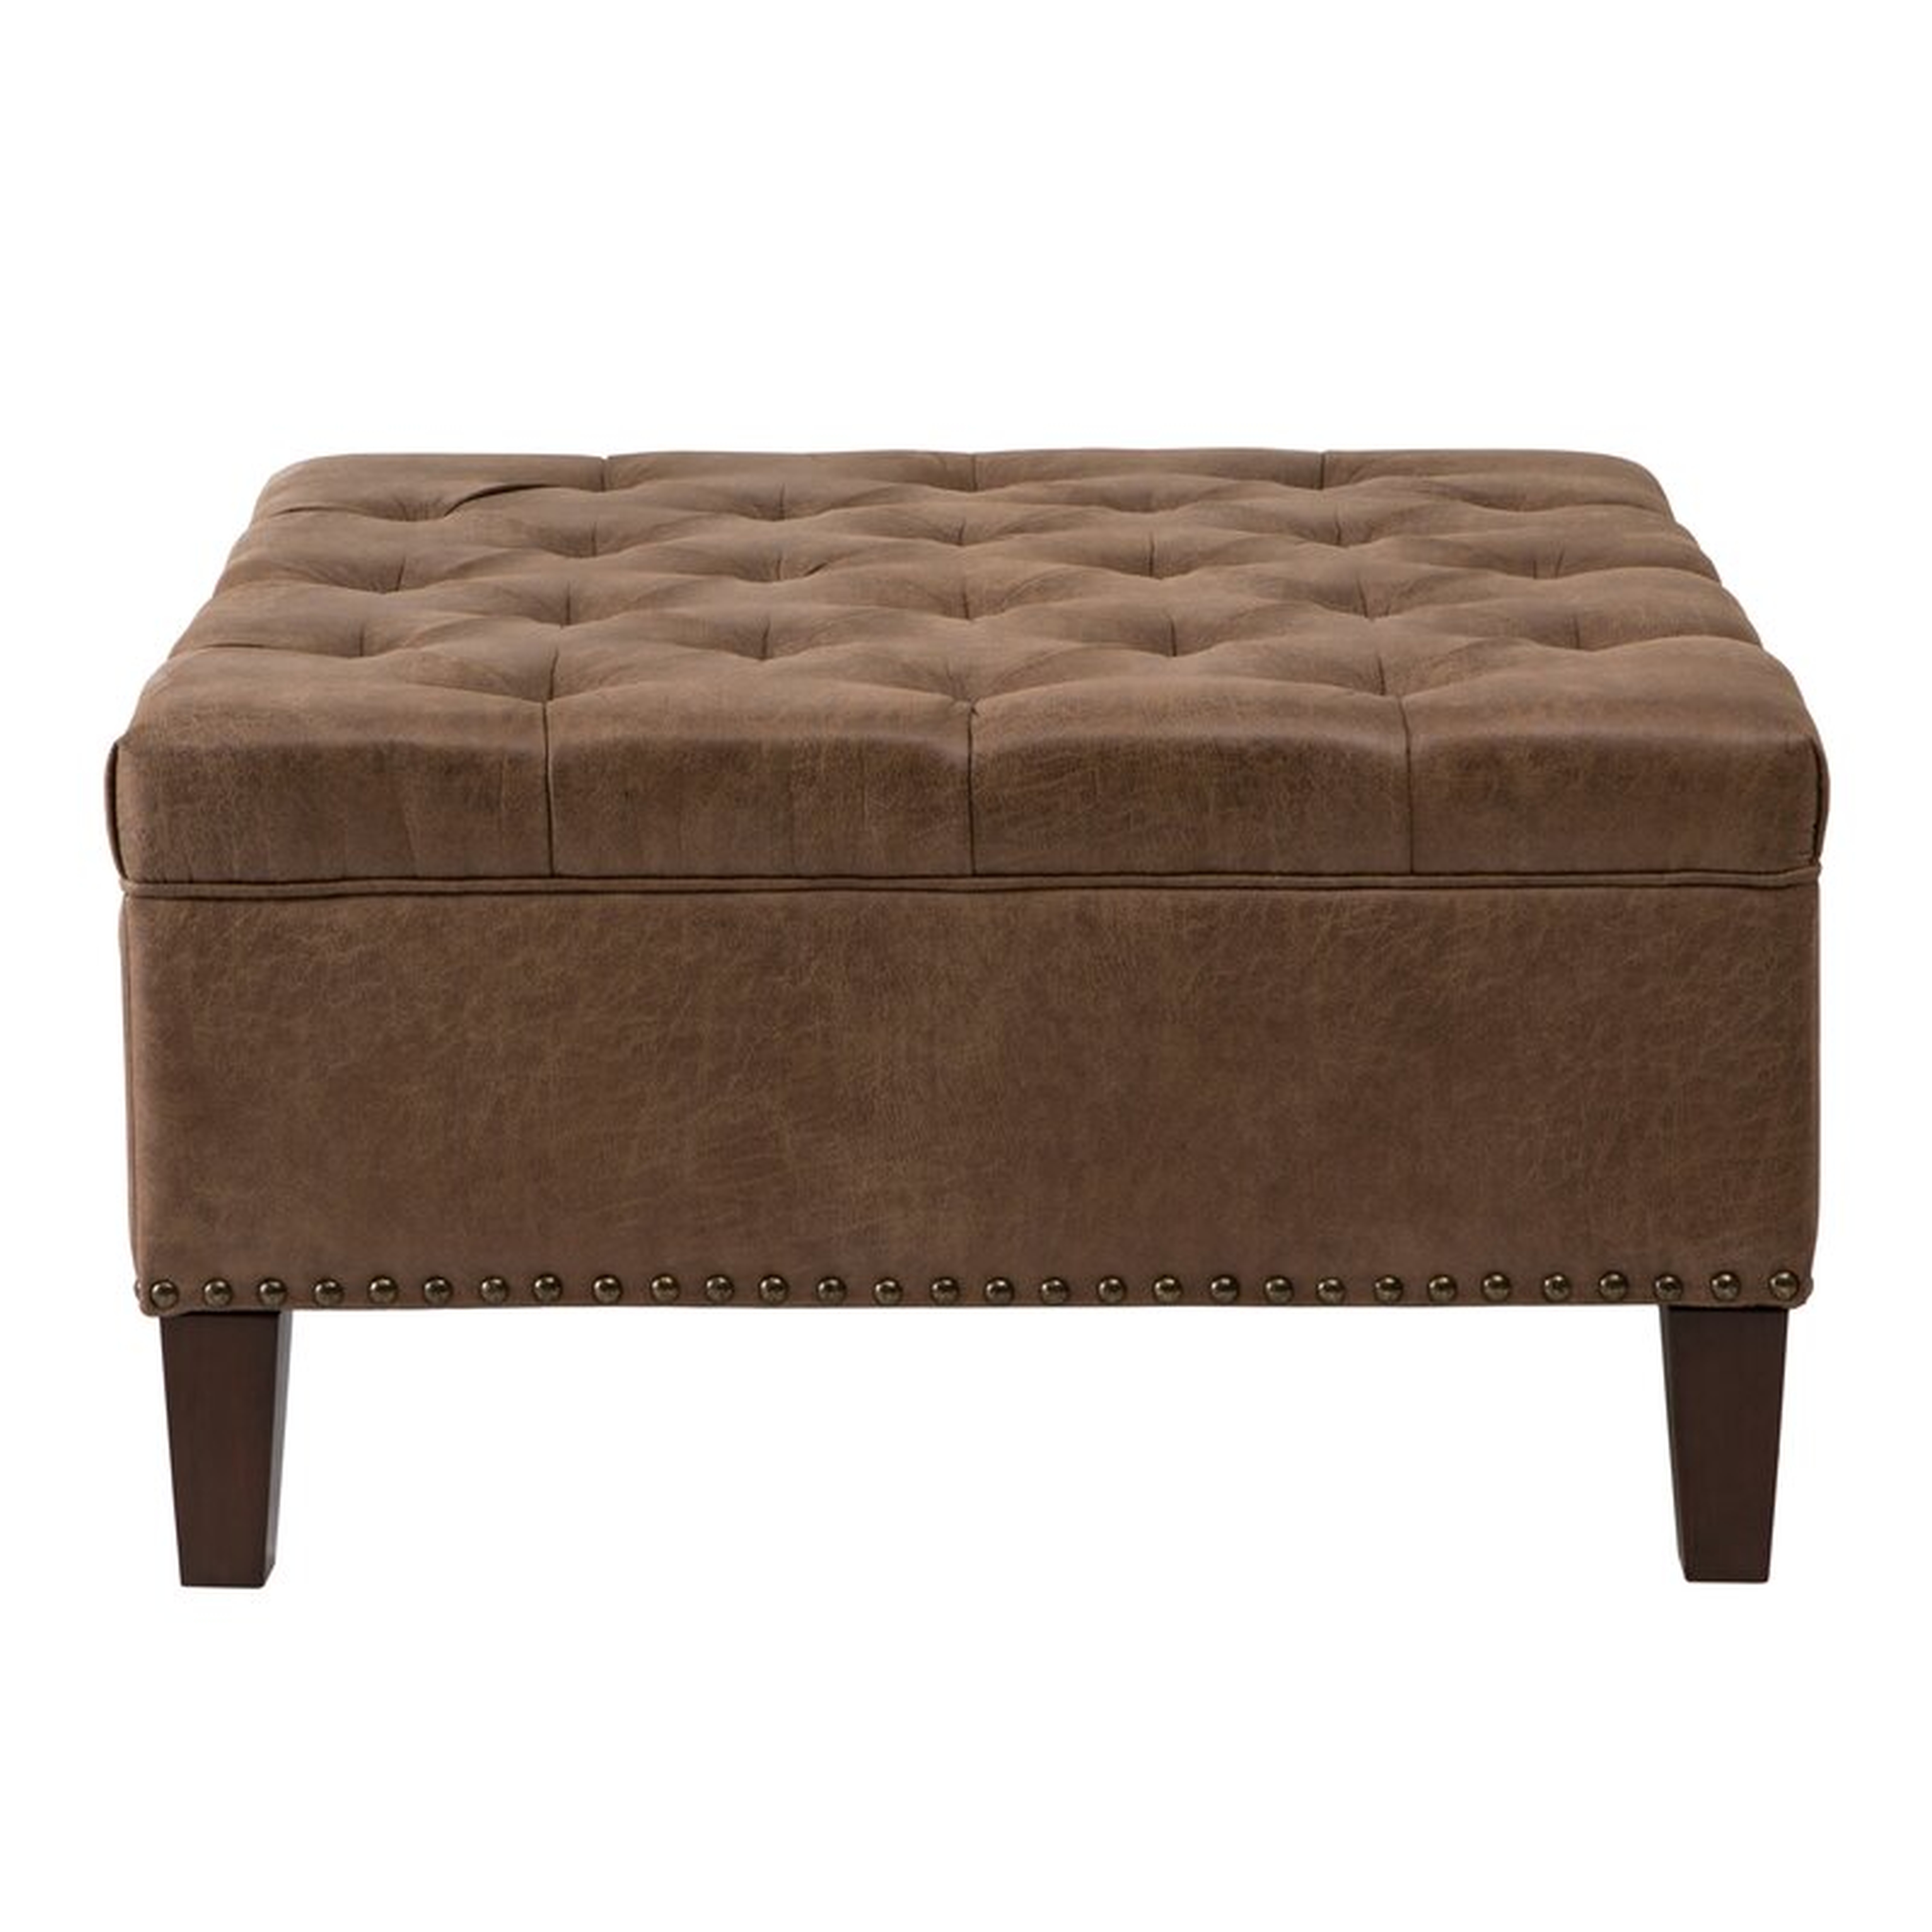 Sigler 35.5'' Wide Faux Leather Tufted Square Cocktail Ottoman - Wayfair